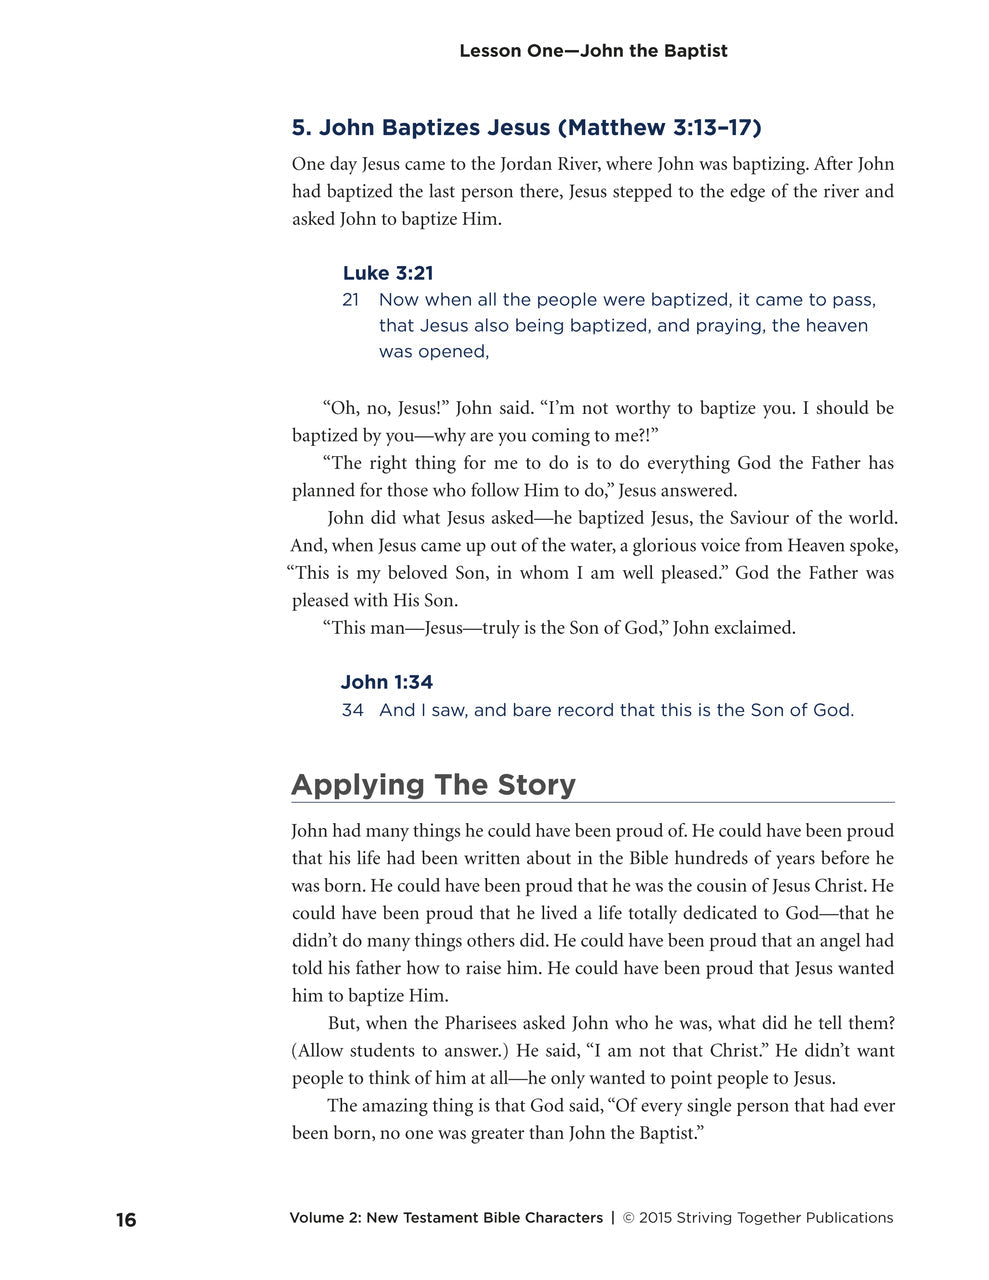 Stories of Grace: New Testament Bible Characters Teacher Edition Download